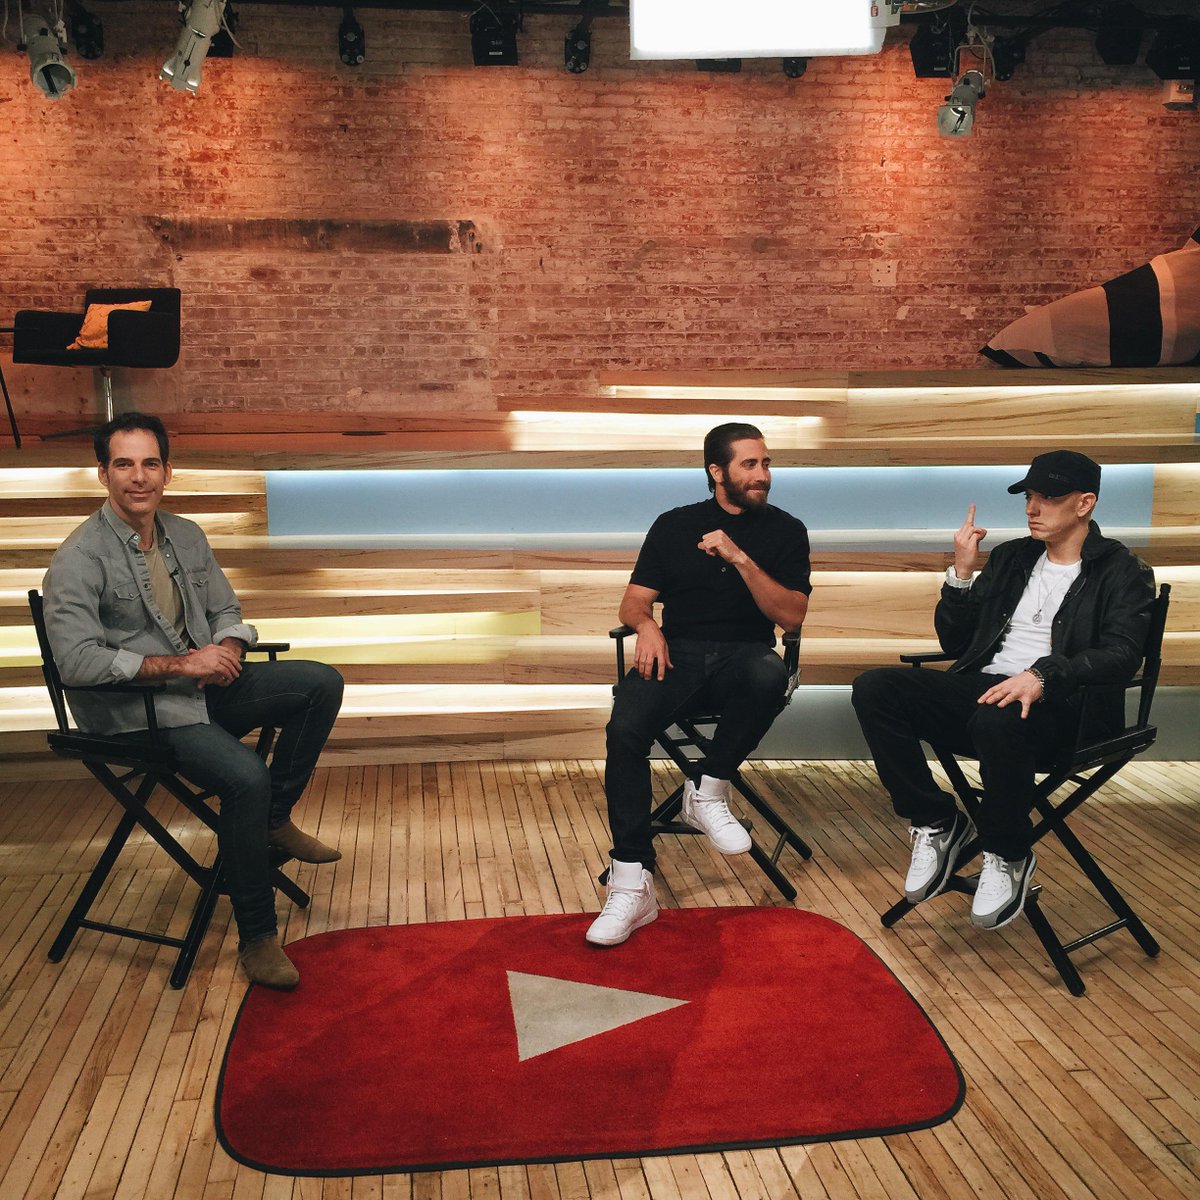 Me + Jake getting ready with Joe Levy for the #Southpaw sessions live tomorrow at the @Youtube Space in NYC. http://t.co/54NzRqWRhv